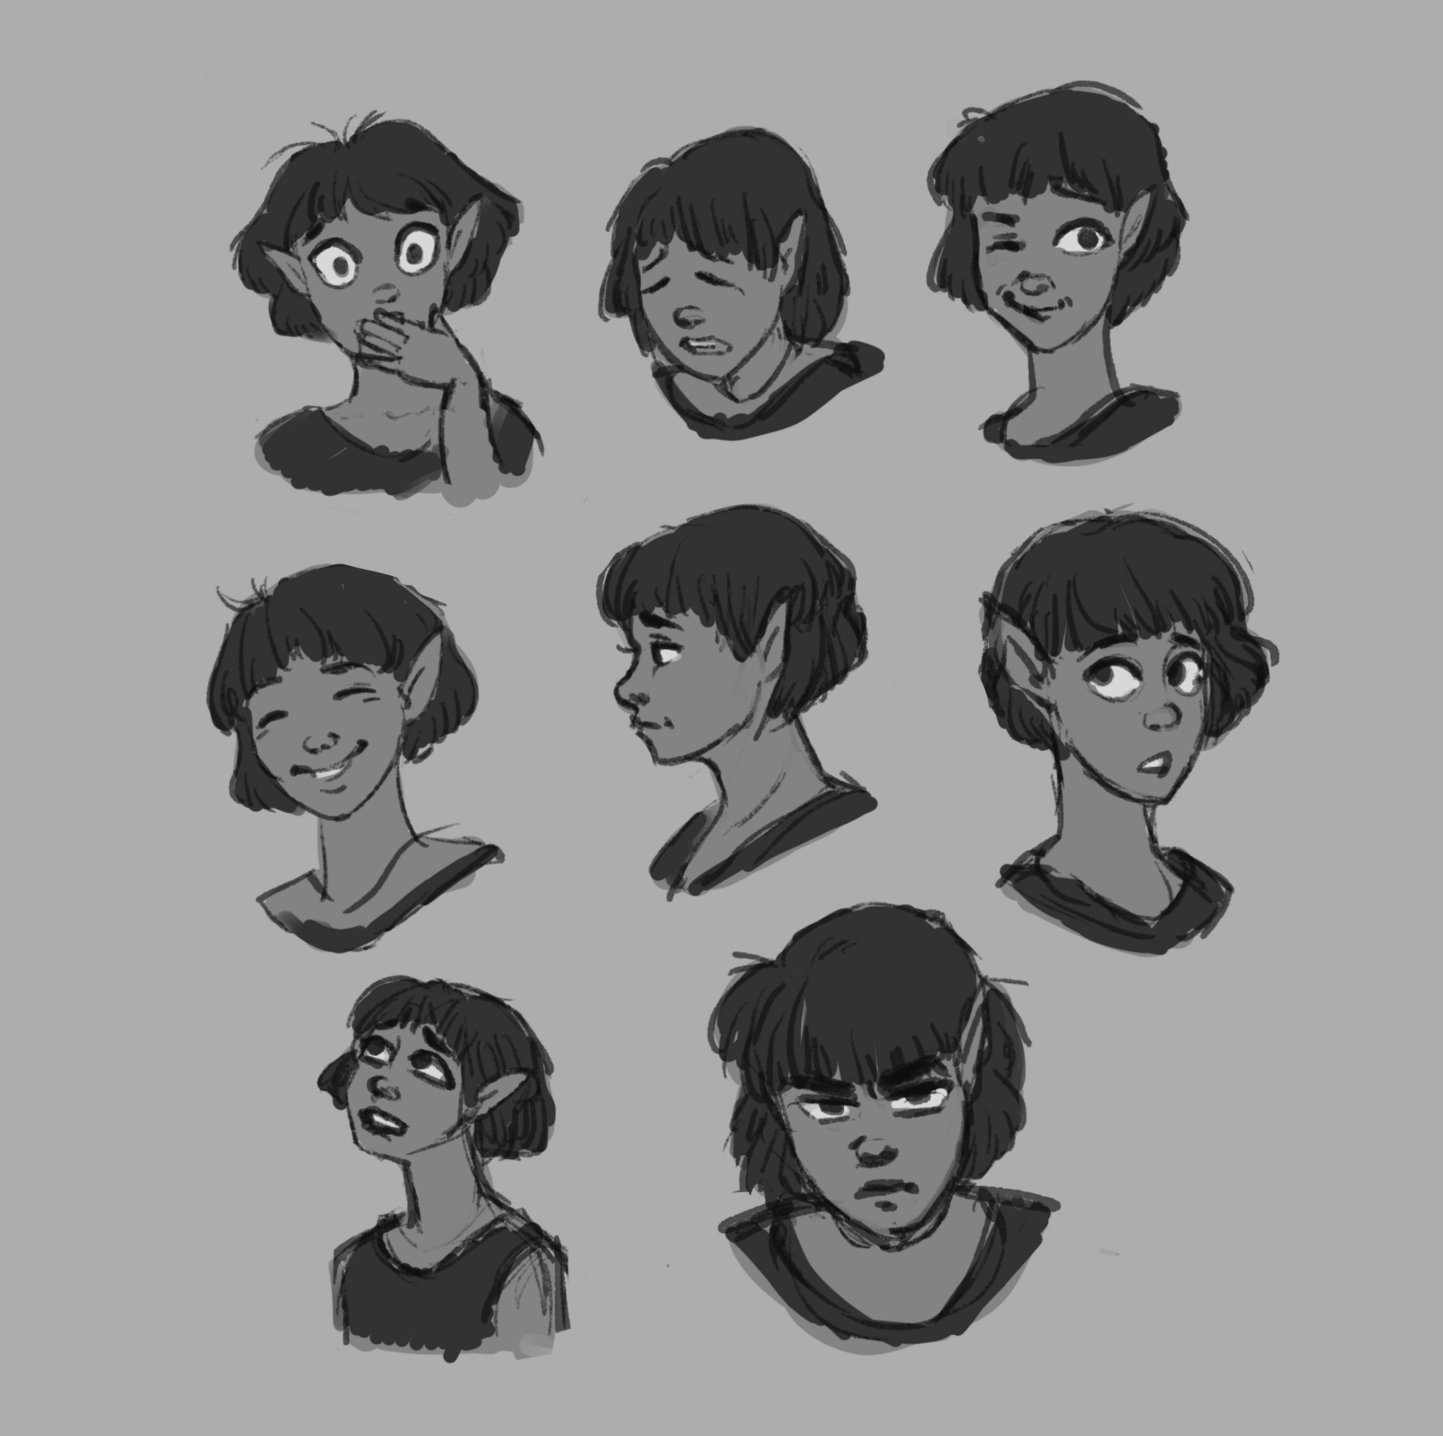 An illustration of an elf character performing series of facial expressions. There are a total of eight images and the expression range from happy to sad to mad and surprised. The elf has mid tone skin and black hair. 